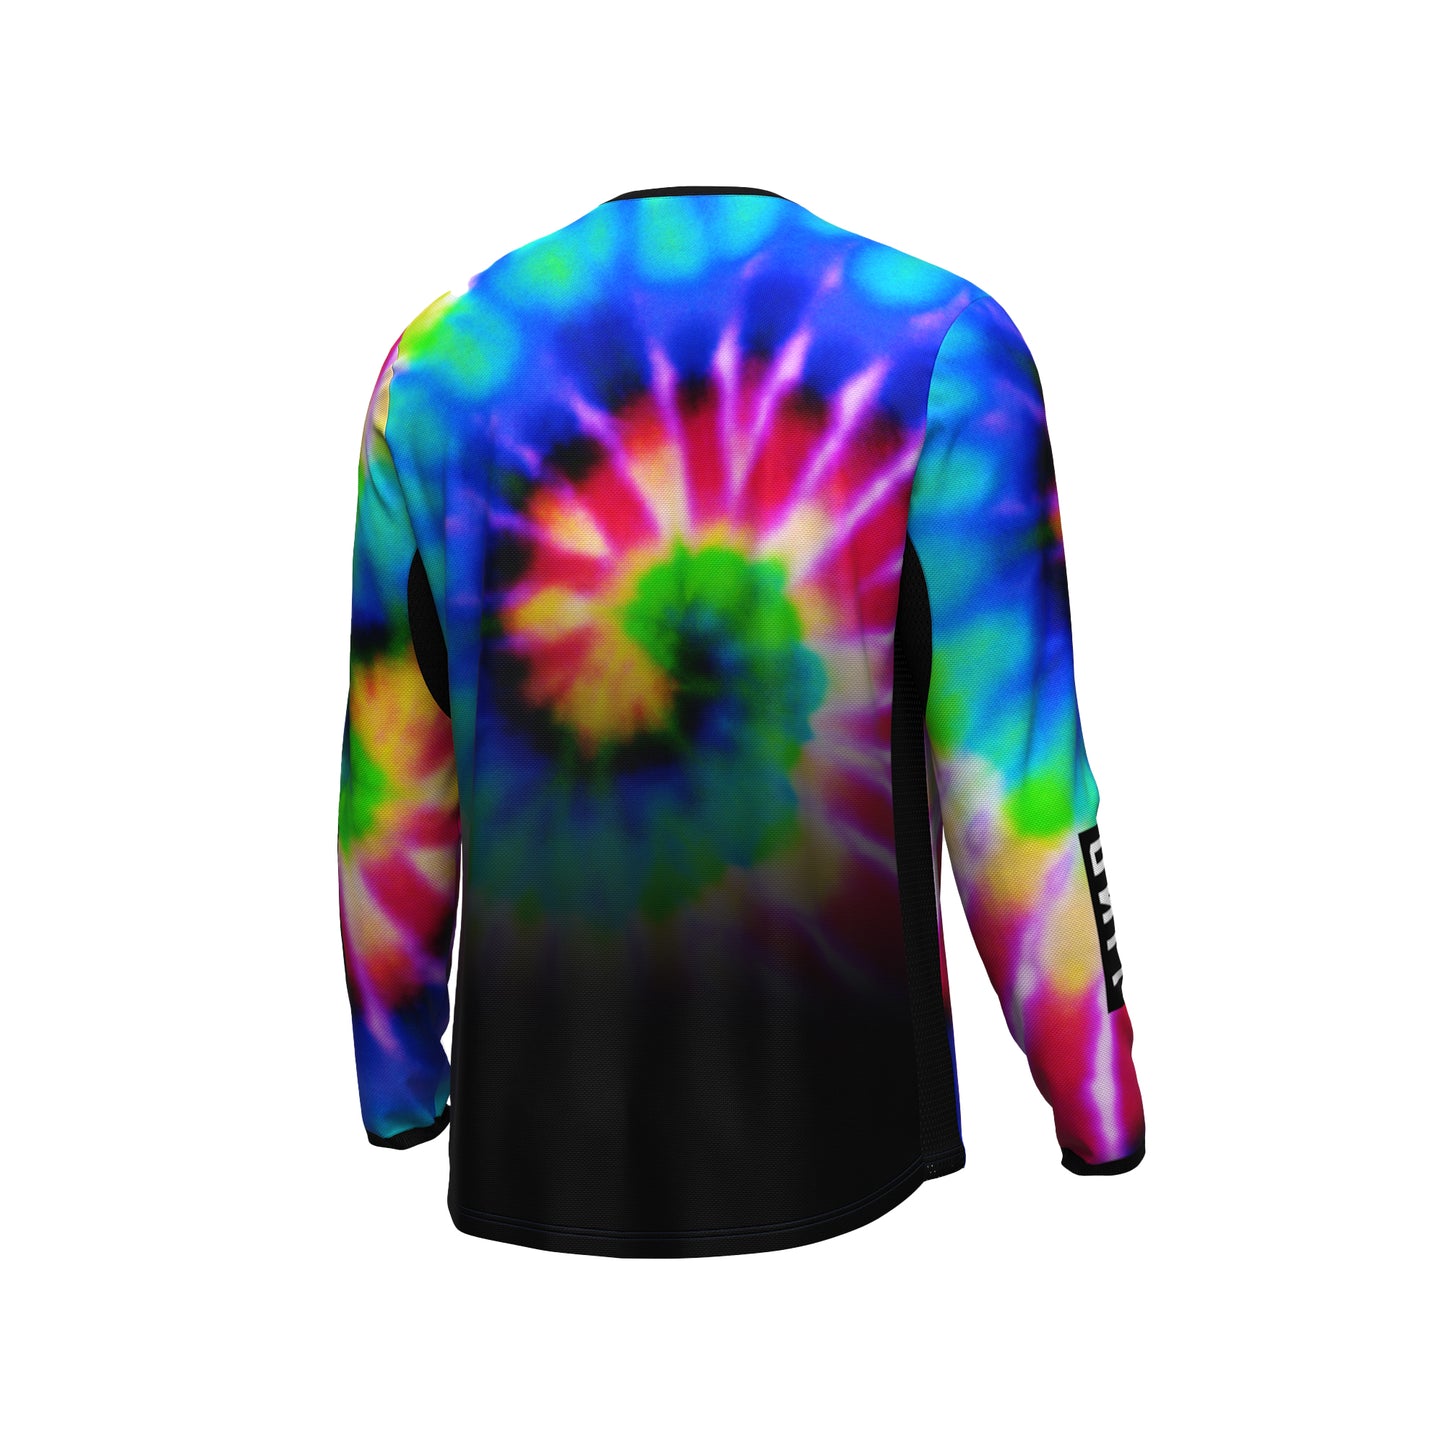 Unit Youth Long Sleeve Jersey - Youth S - New Day - Image 2